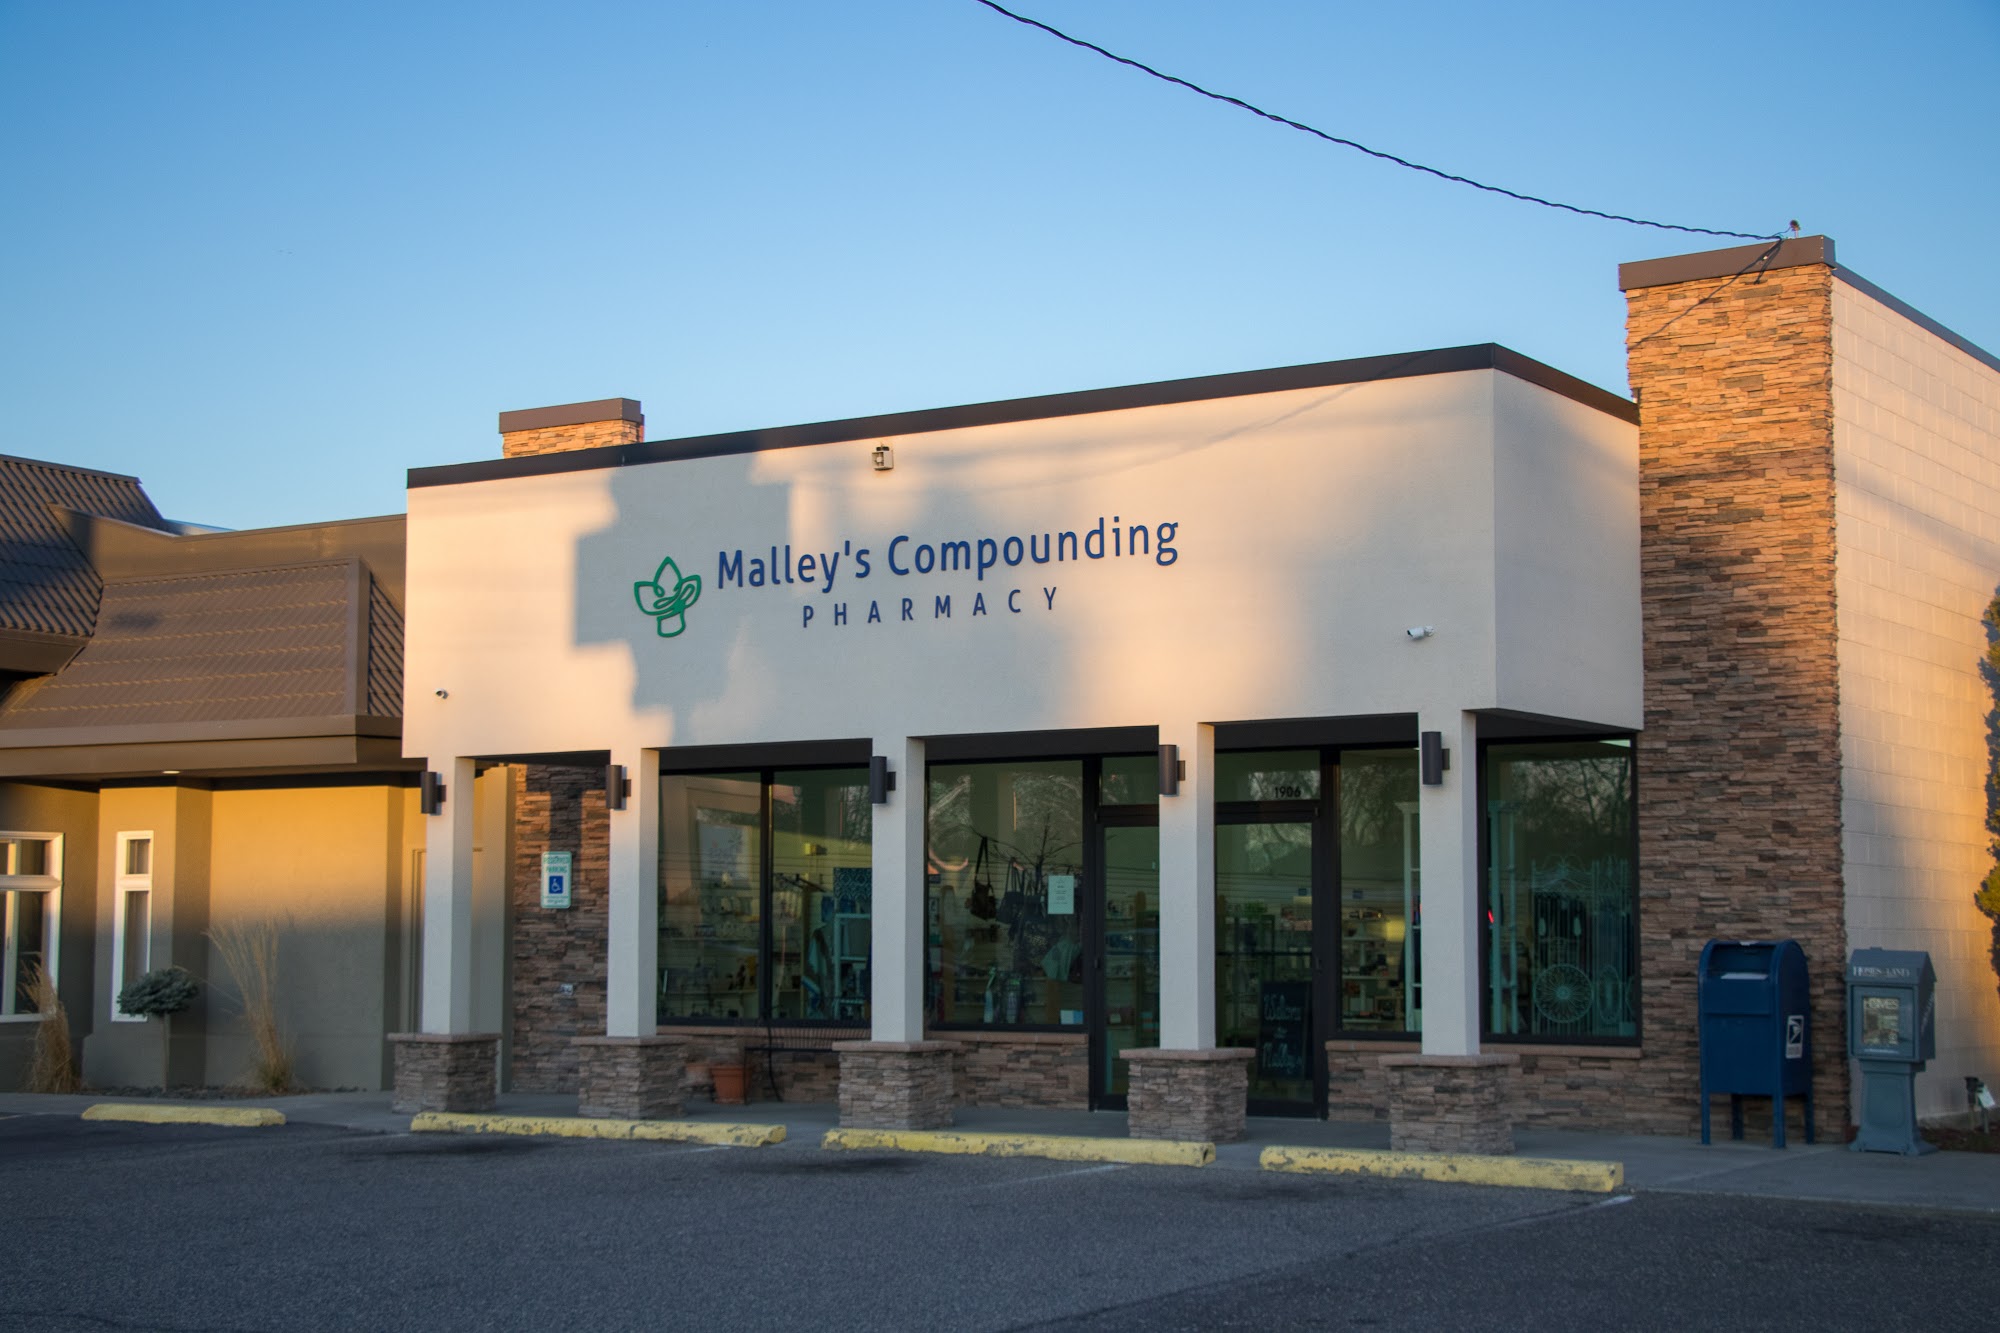 Malley's Compounding Pharmacy